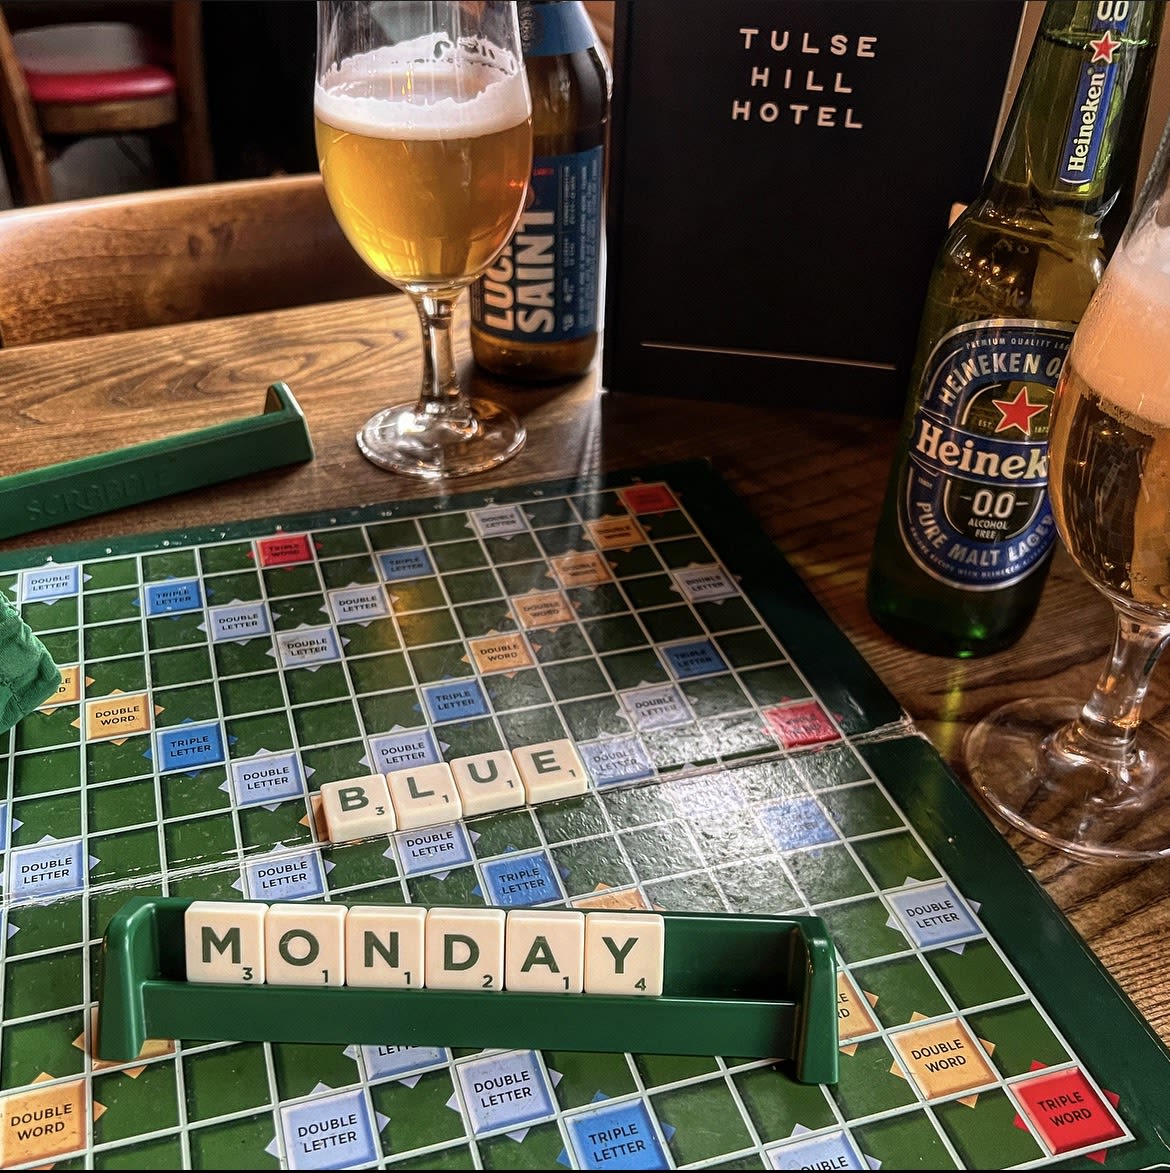 Don’t get caught in Blue Monday & cheer yourself up with game night! Grab your friend and fam and enjoy good selection of drinks & don’t forget about 50% off Mains 🤤
We’ve got you!
.
.
.
.
.
#tulsehillhotel #gastropub #50%off #bluemonday #boardgames #se24 #tothepub